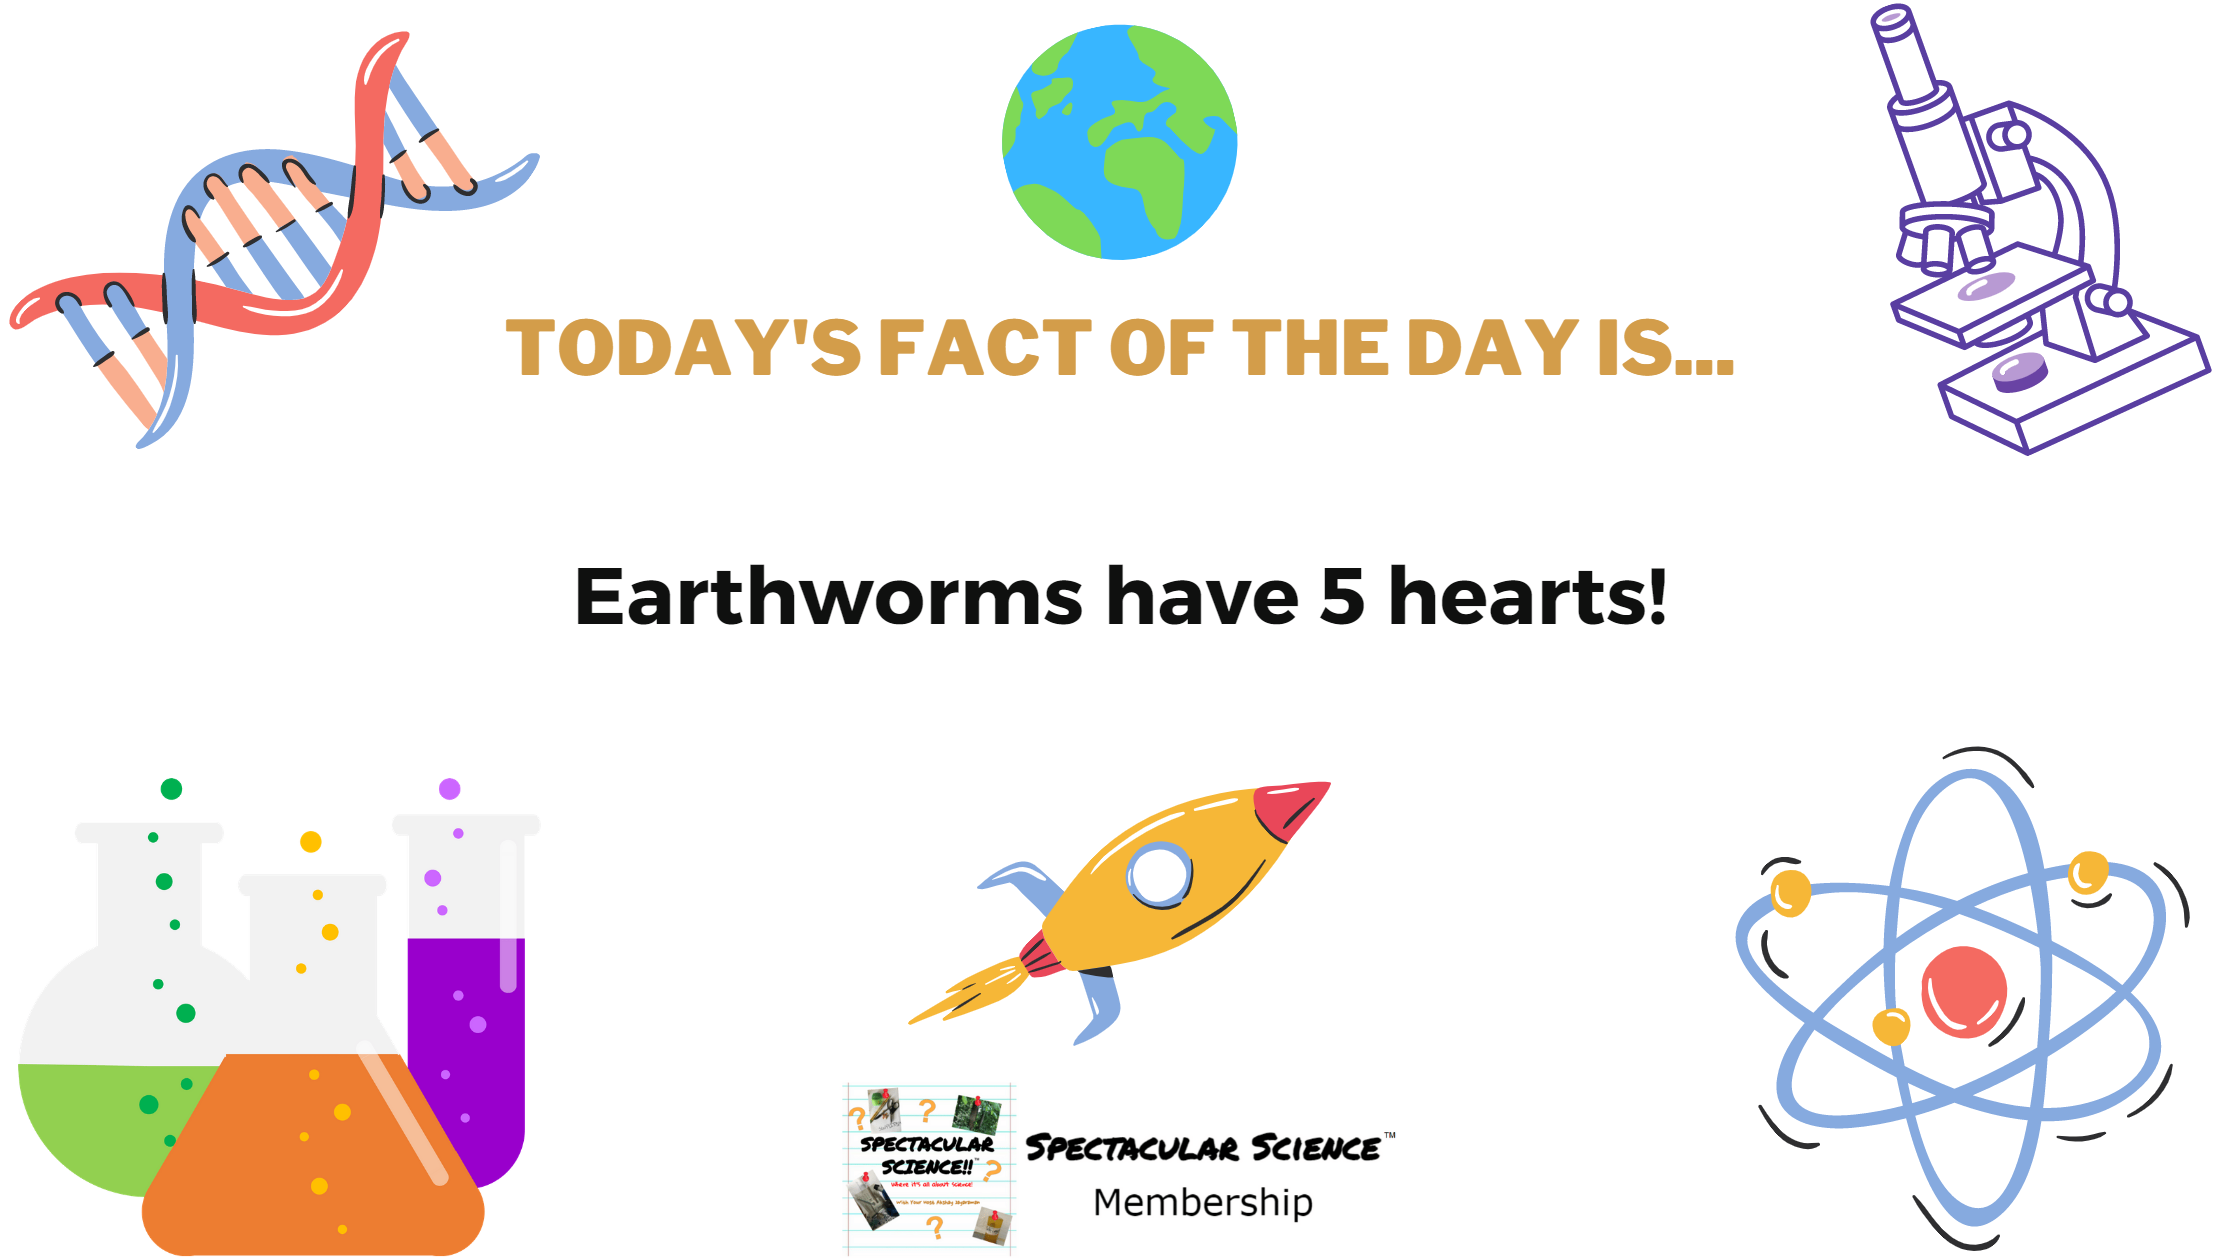 Fact of the Day Image May 13